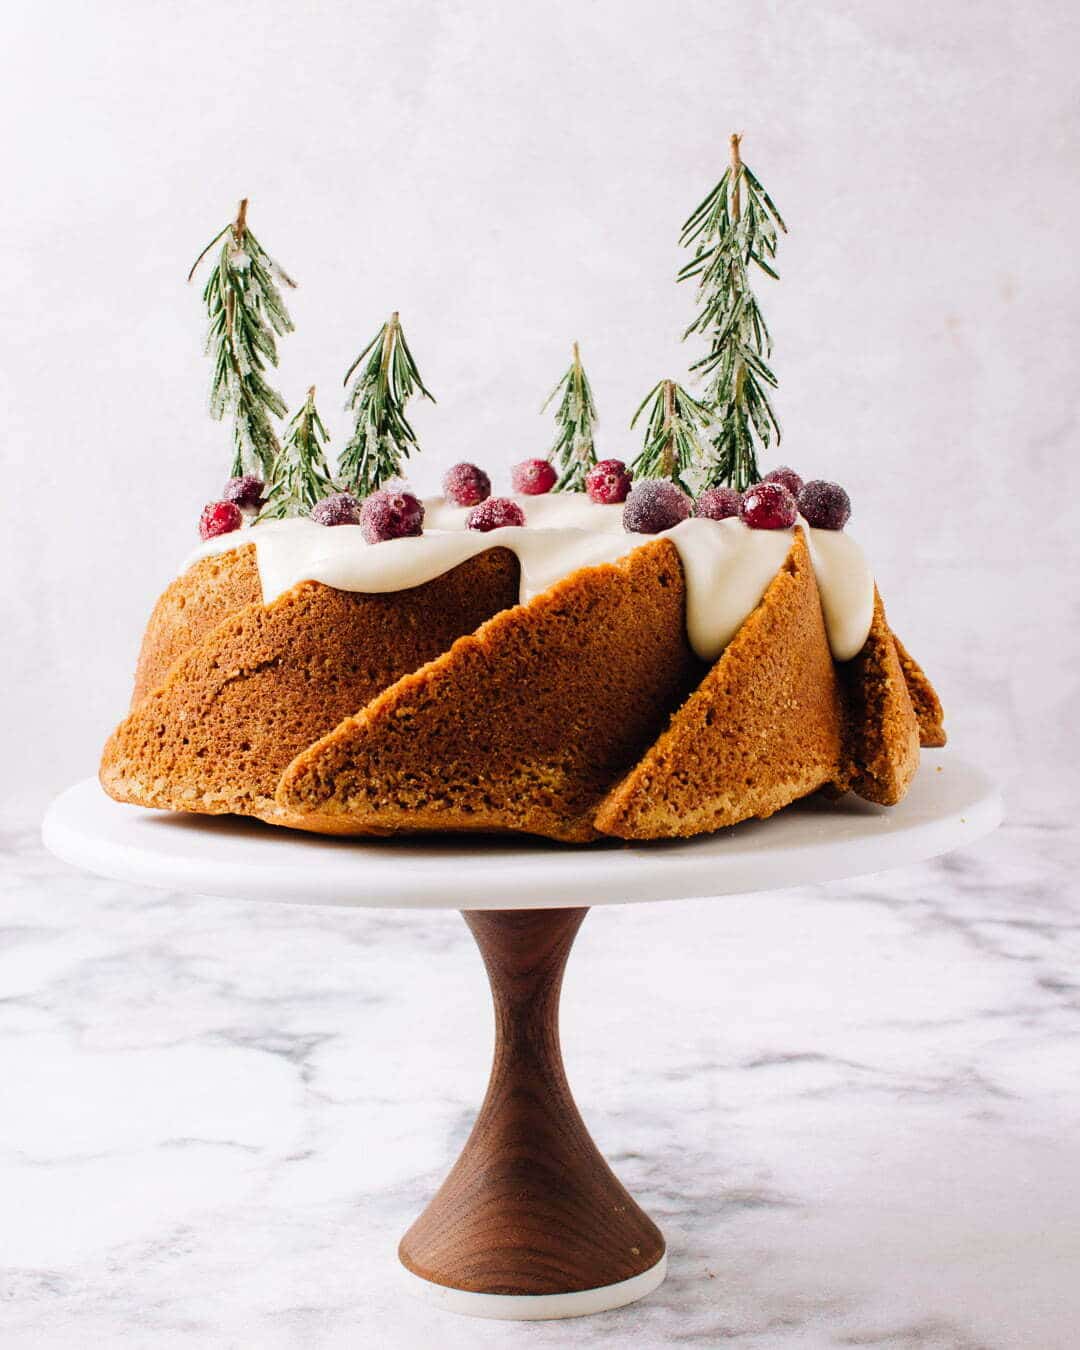 https://foodess.com/wp-content/uploads/2020/11/Holiday-Spice-Cake-1-1.jpg